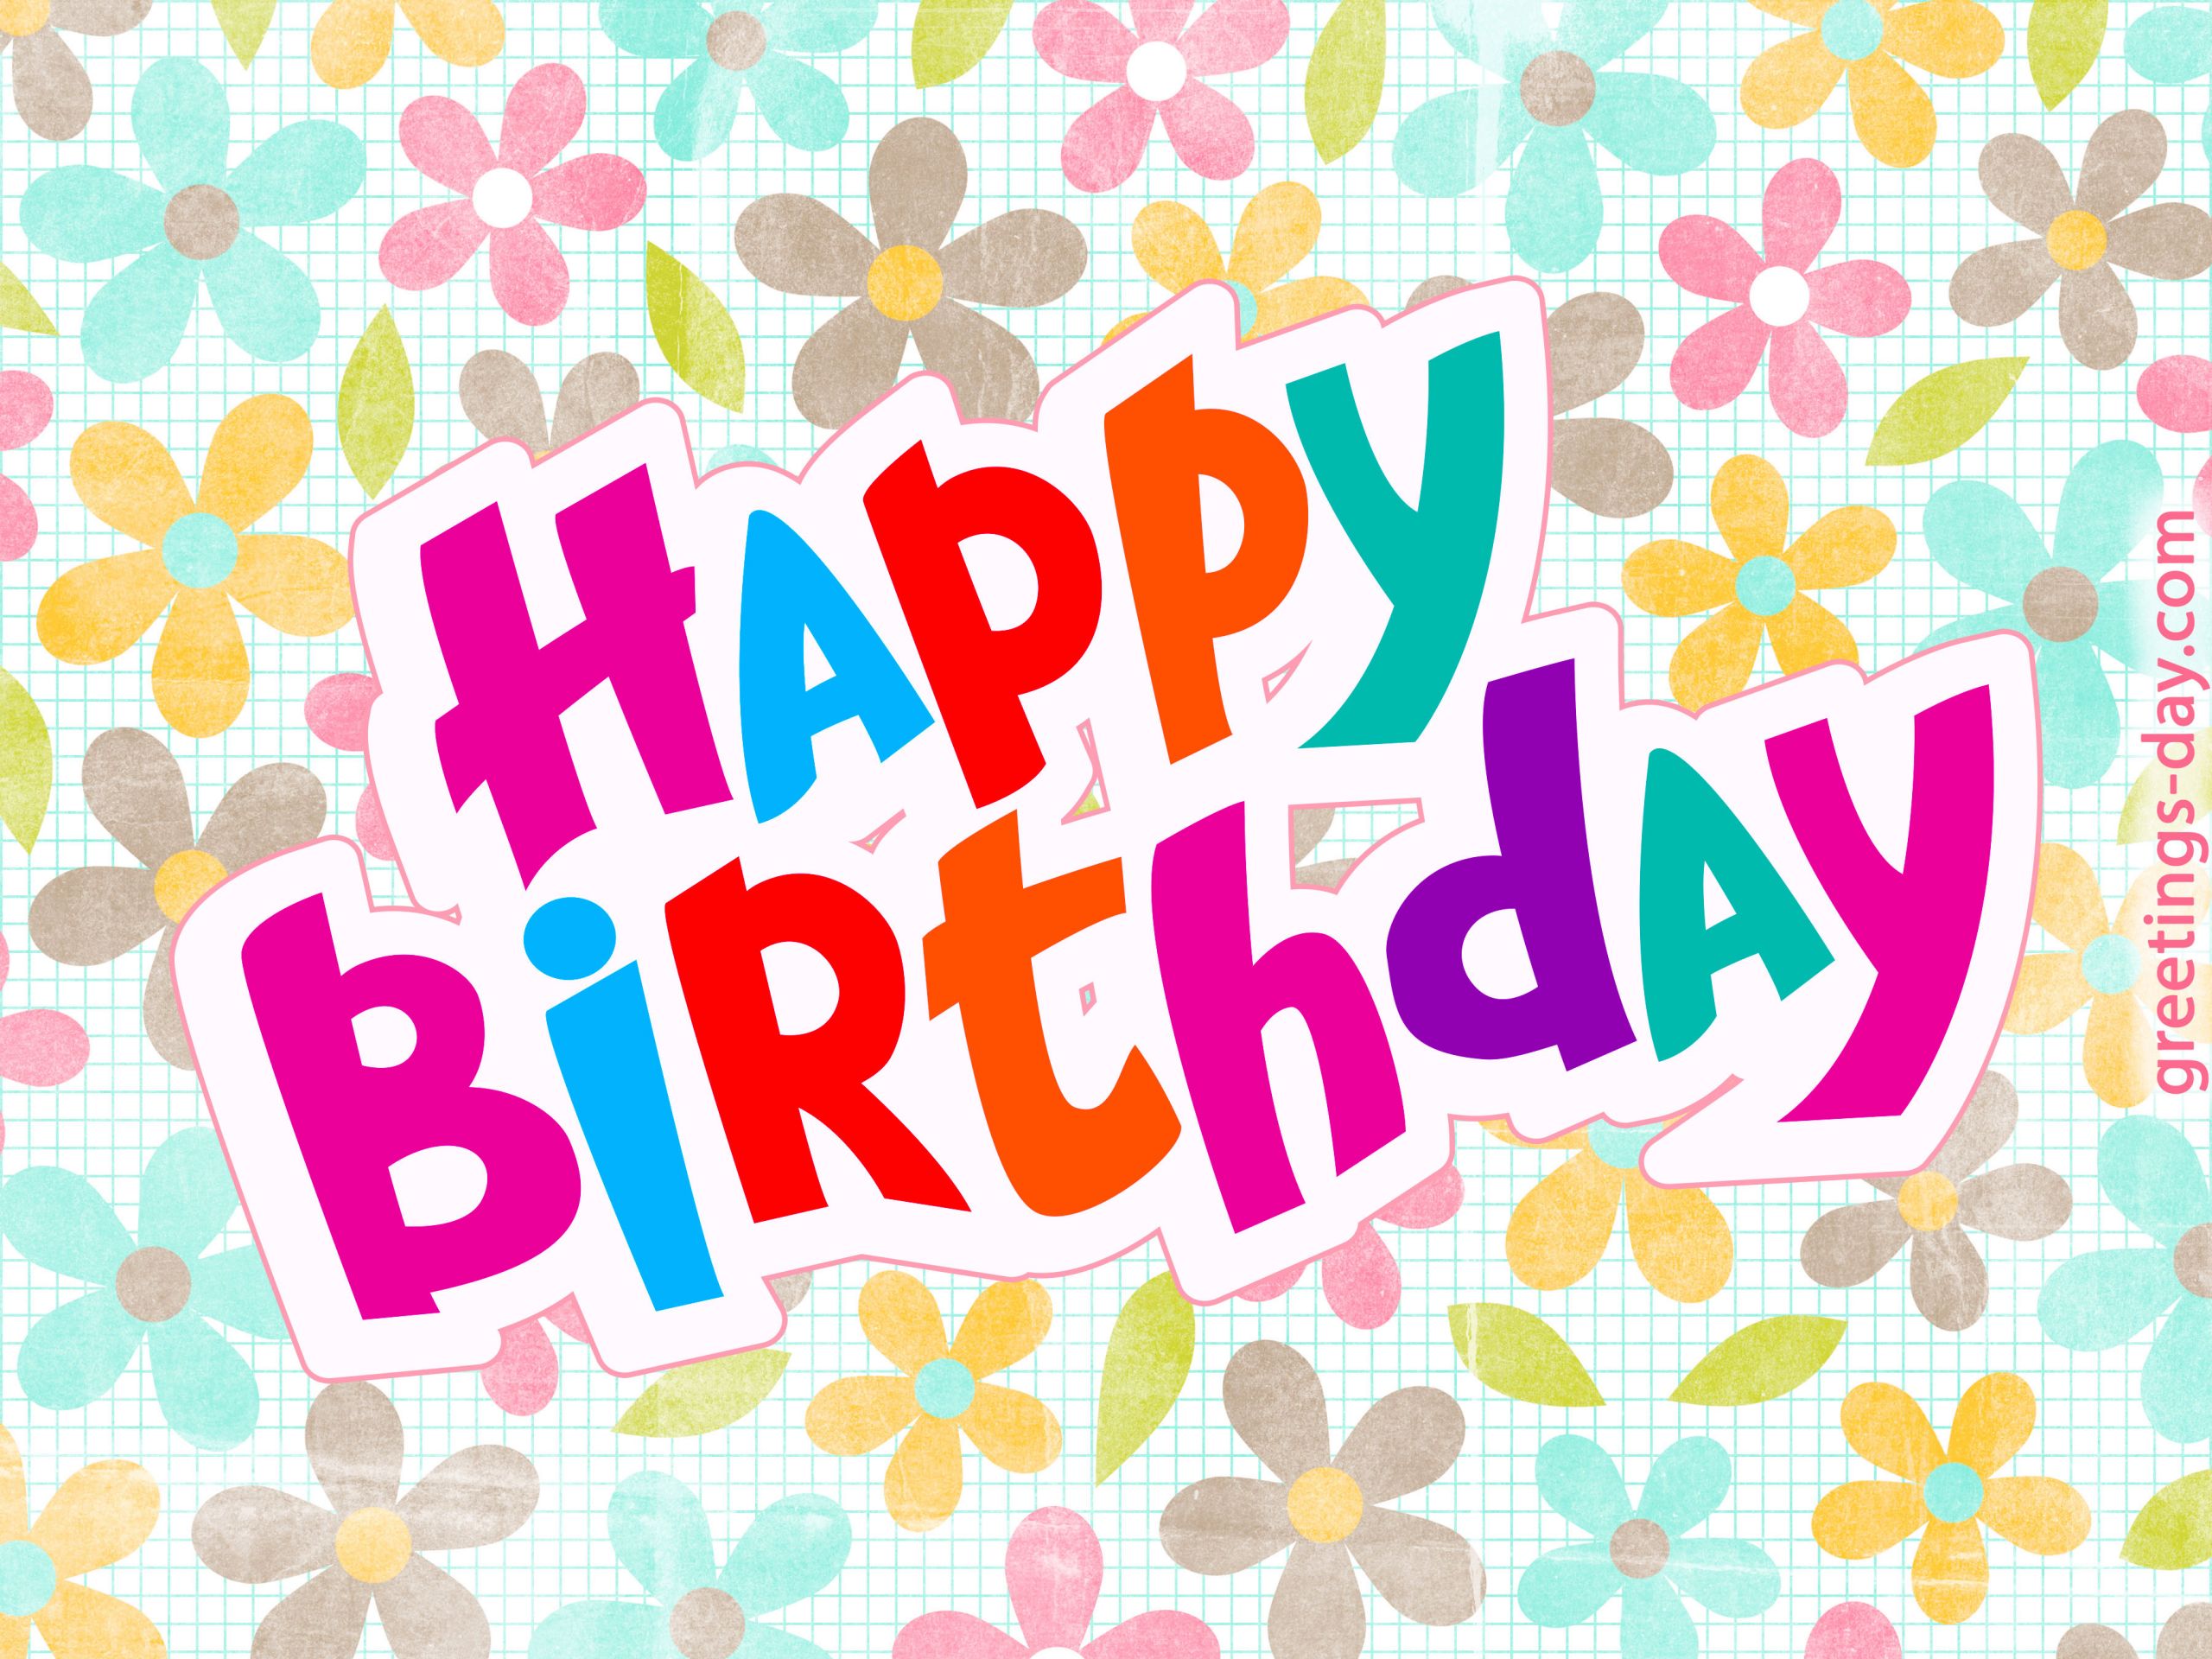 A Happy Birthday Card
 Happy birthday greeting Cards image to you friend